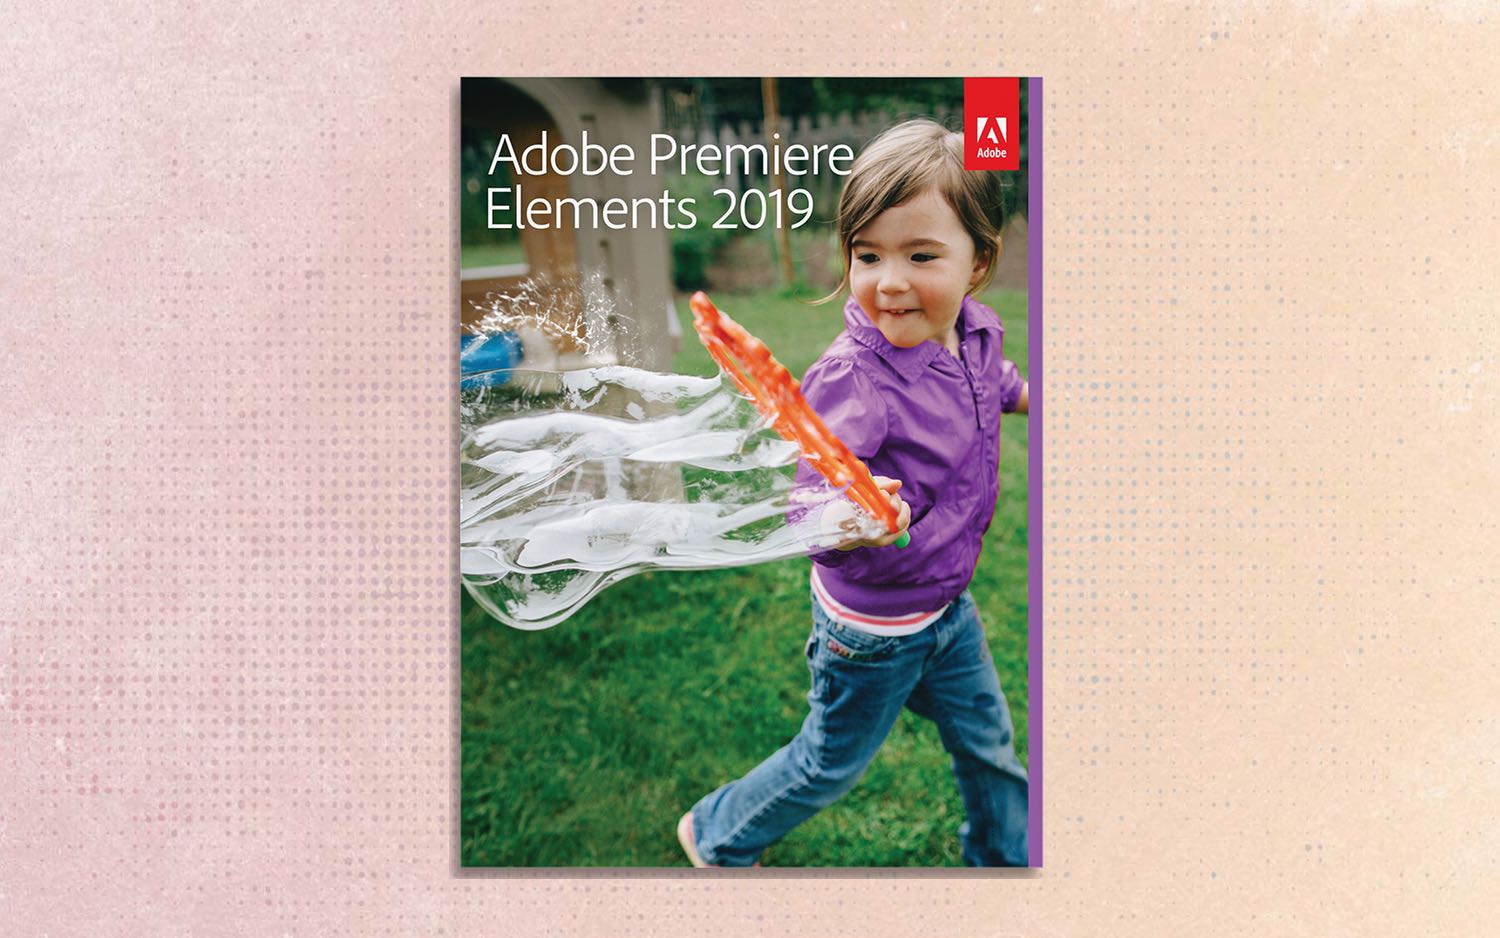 Adobe Premiere Elements 2019 - Full Review and Benchmarks | Tom's 